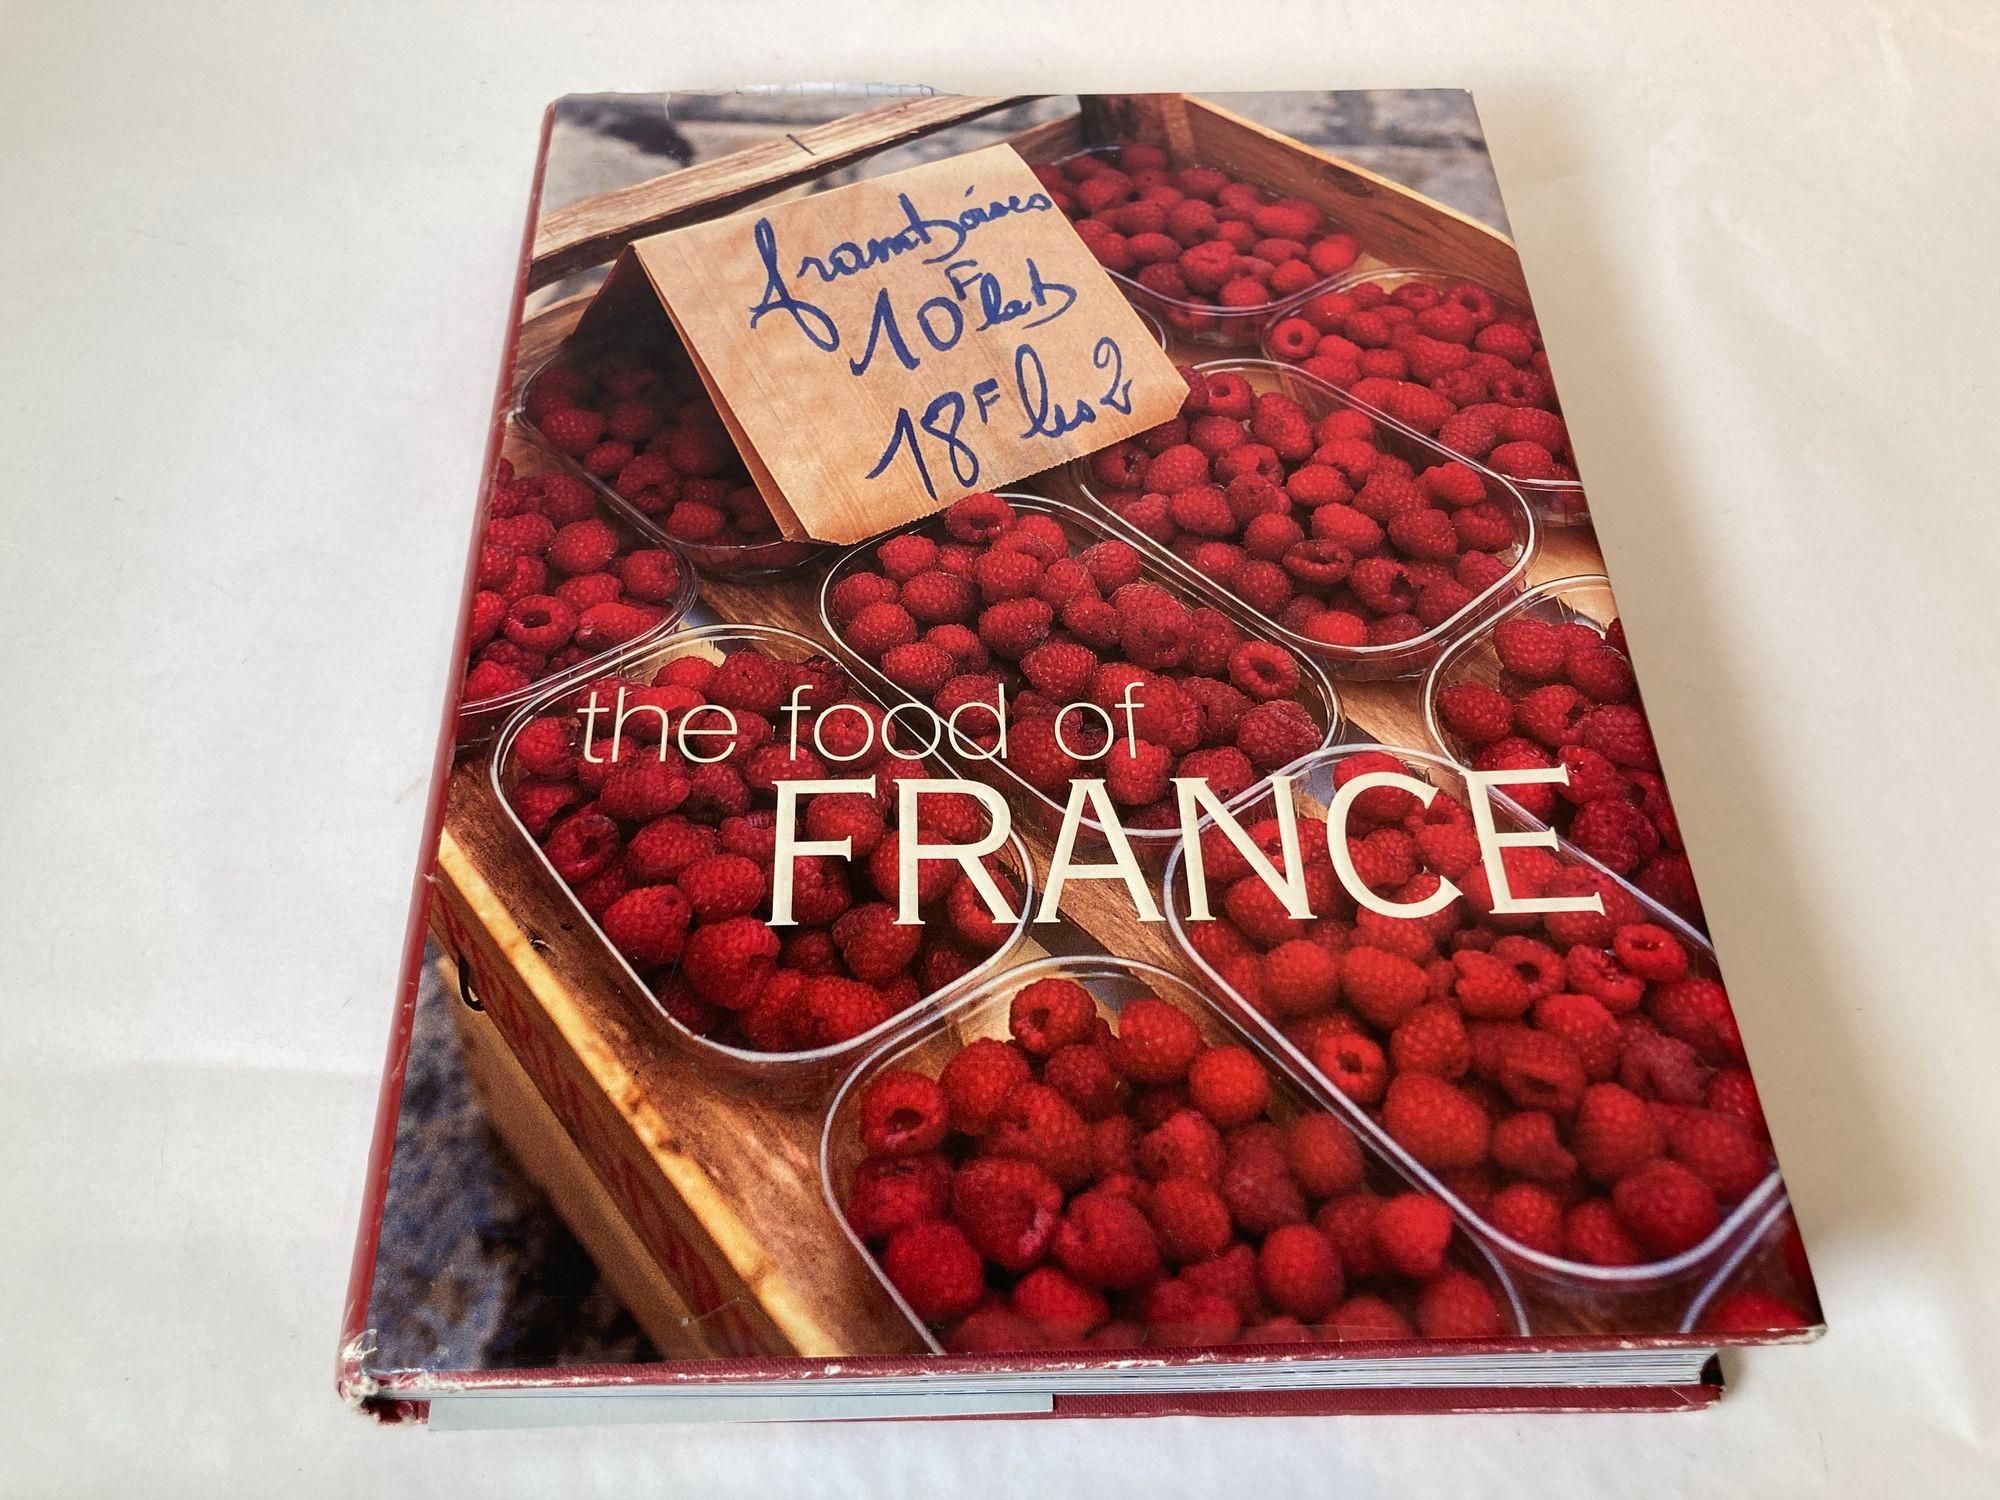 The Food of France by Kay Halsey and Lulu Grimes hardcover cook book.
(Part of the A Journey for Food Lovers Series)by Maria Villegas and Sarah Randell
Title: The Food of France
Publisher: Whitecap Books
Publication Date: 2001
Binding: